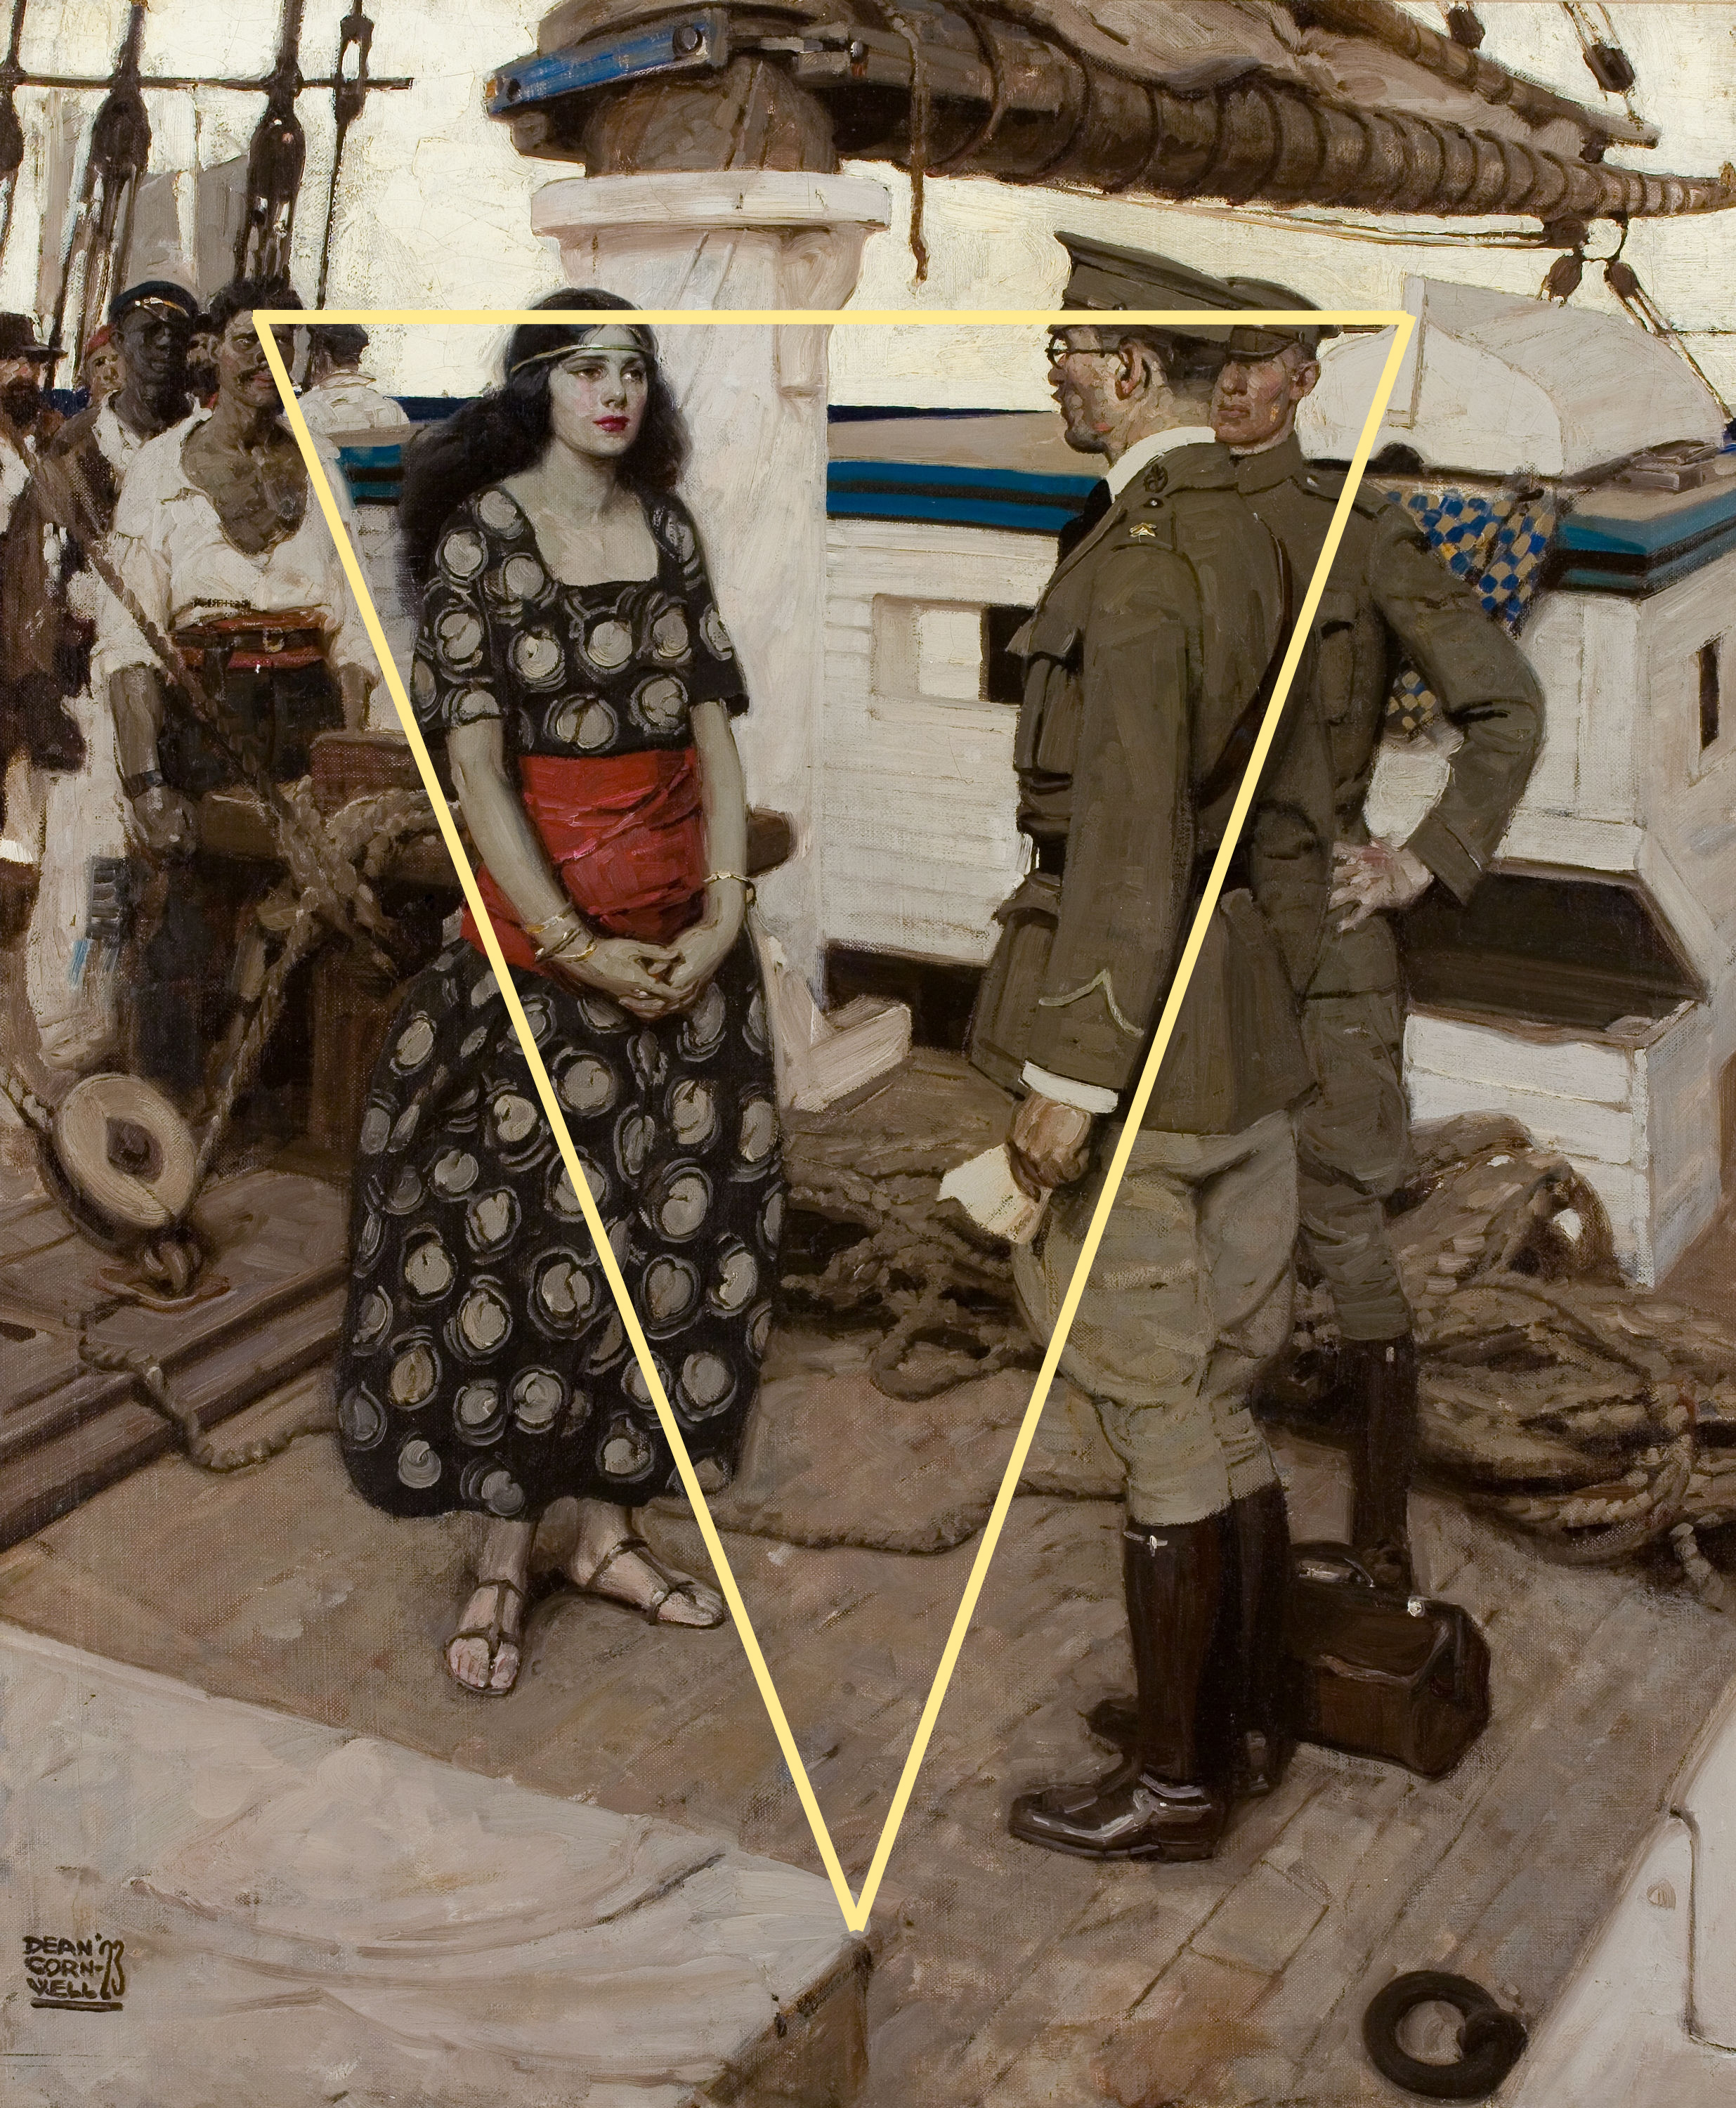 A painting by Dean Cornwell showing a woman being interrogated by what seems to be two officers.